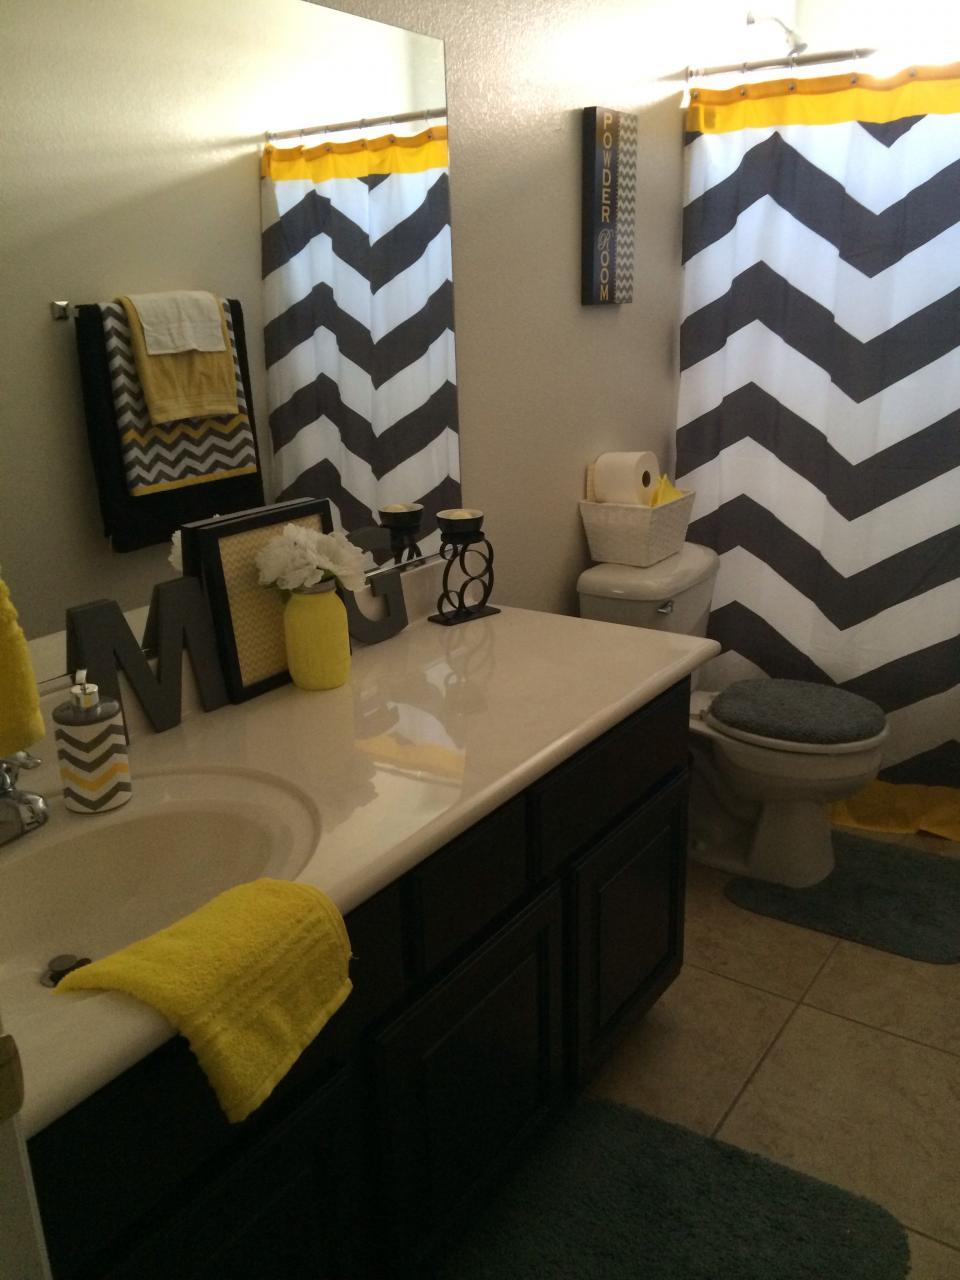 My new cheerful (gender neutral) bathroom! Yellow Black Grey and White